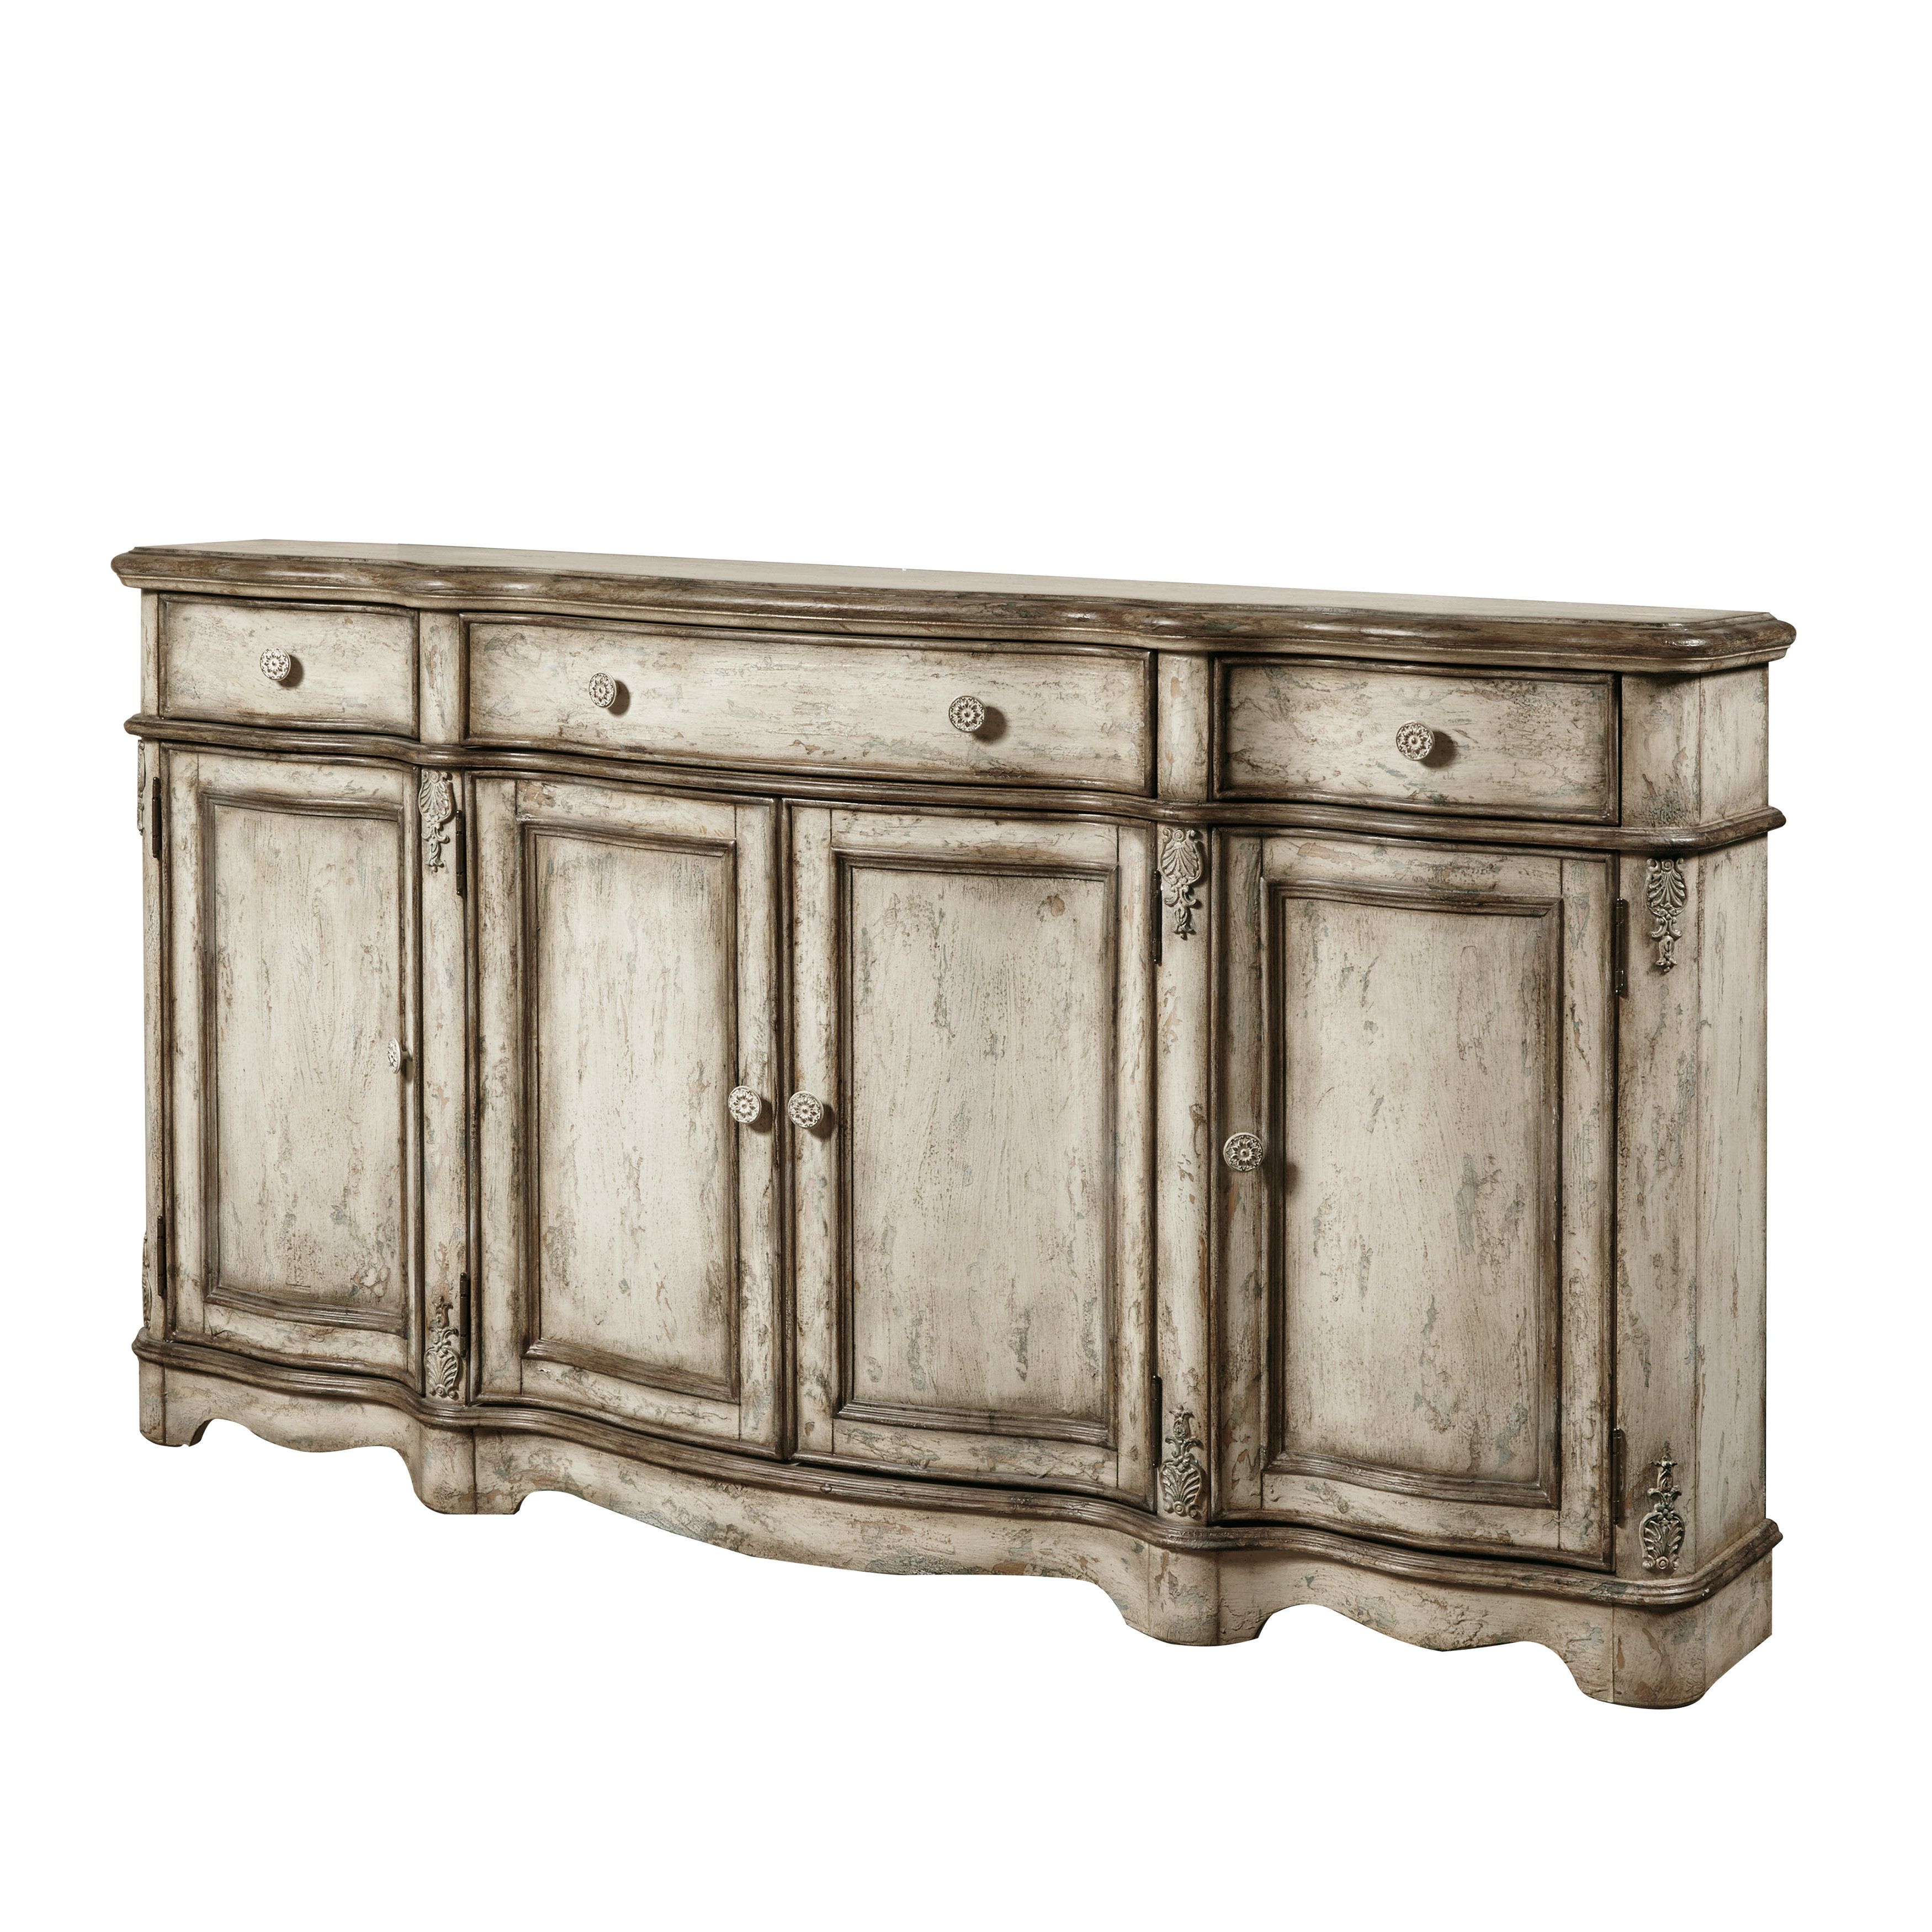 Farmhouse & Rustic Sideboards & Buffets | Birch Lane Pertaining To Best And Newest Adelbert Credenzas (View 13 of 20)